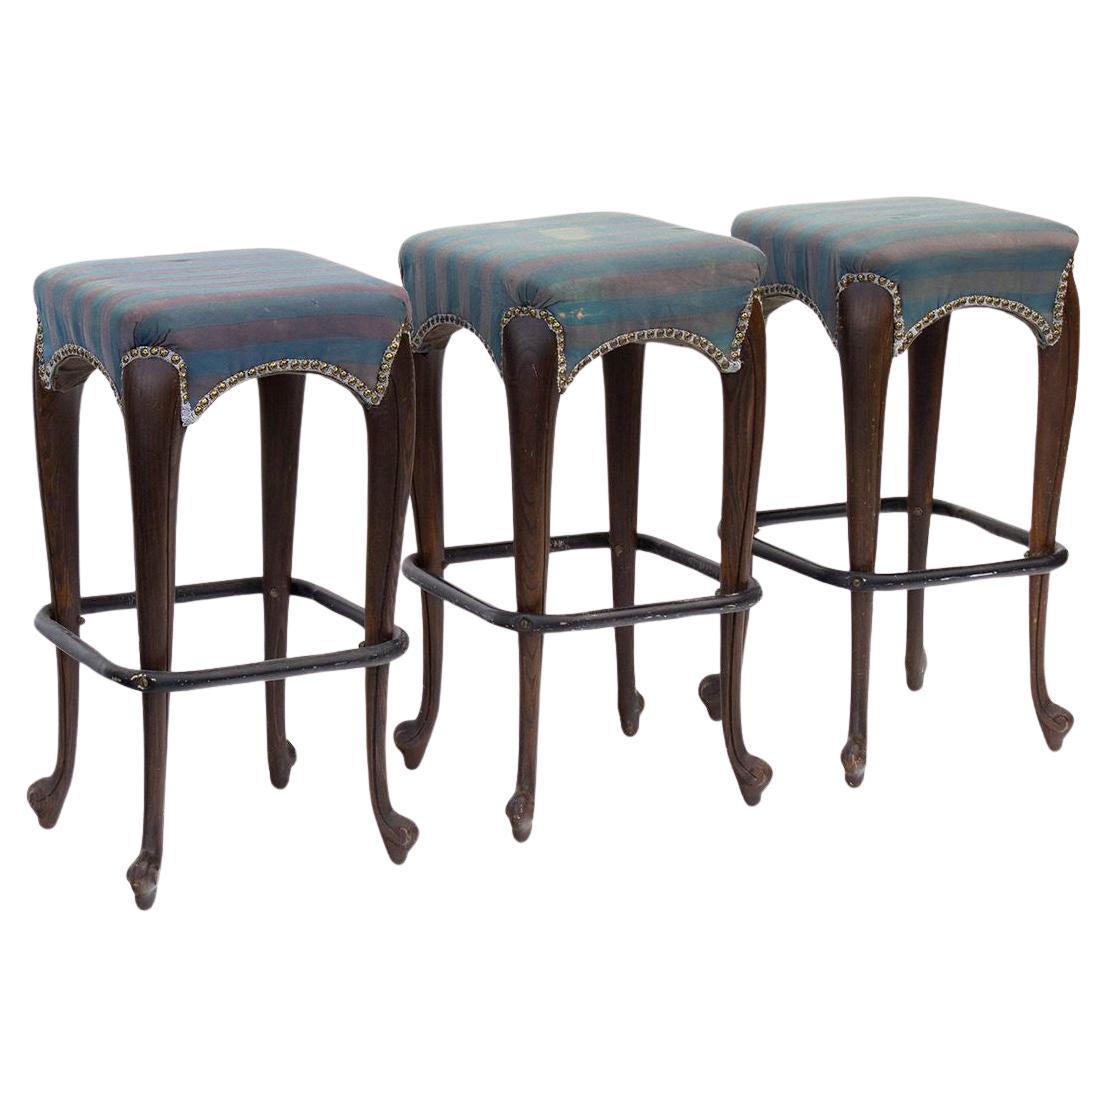 Vintage Cabriole Leg Bar Height Barstools, S/3 For Sale